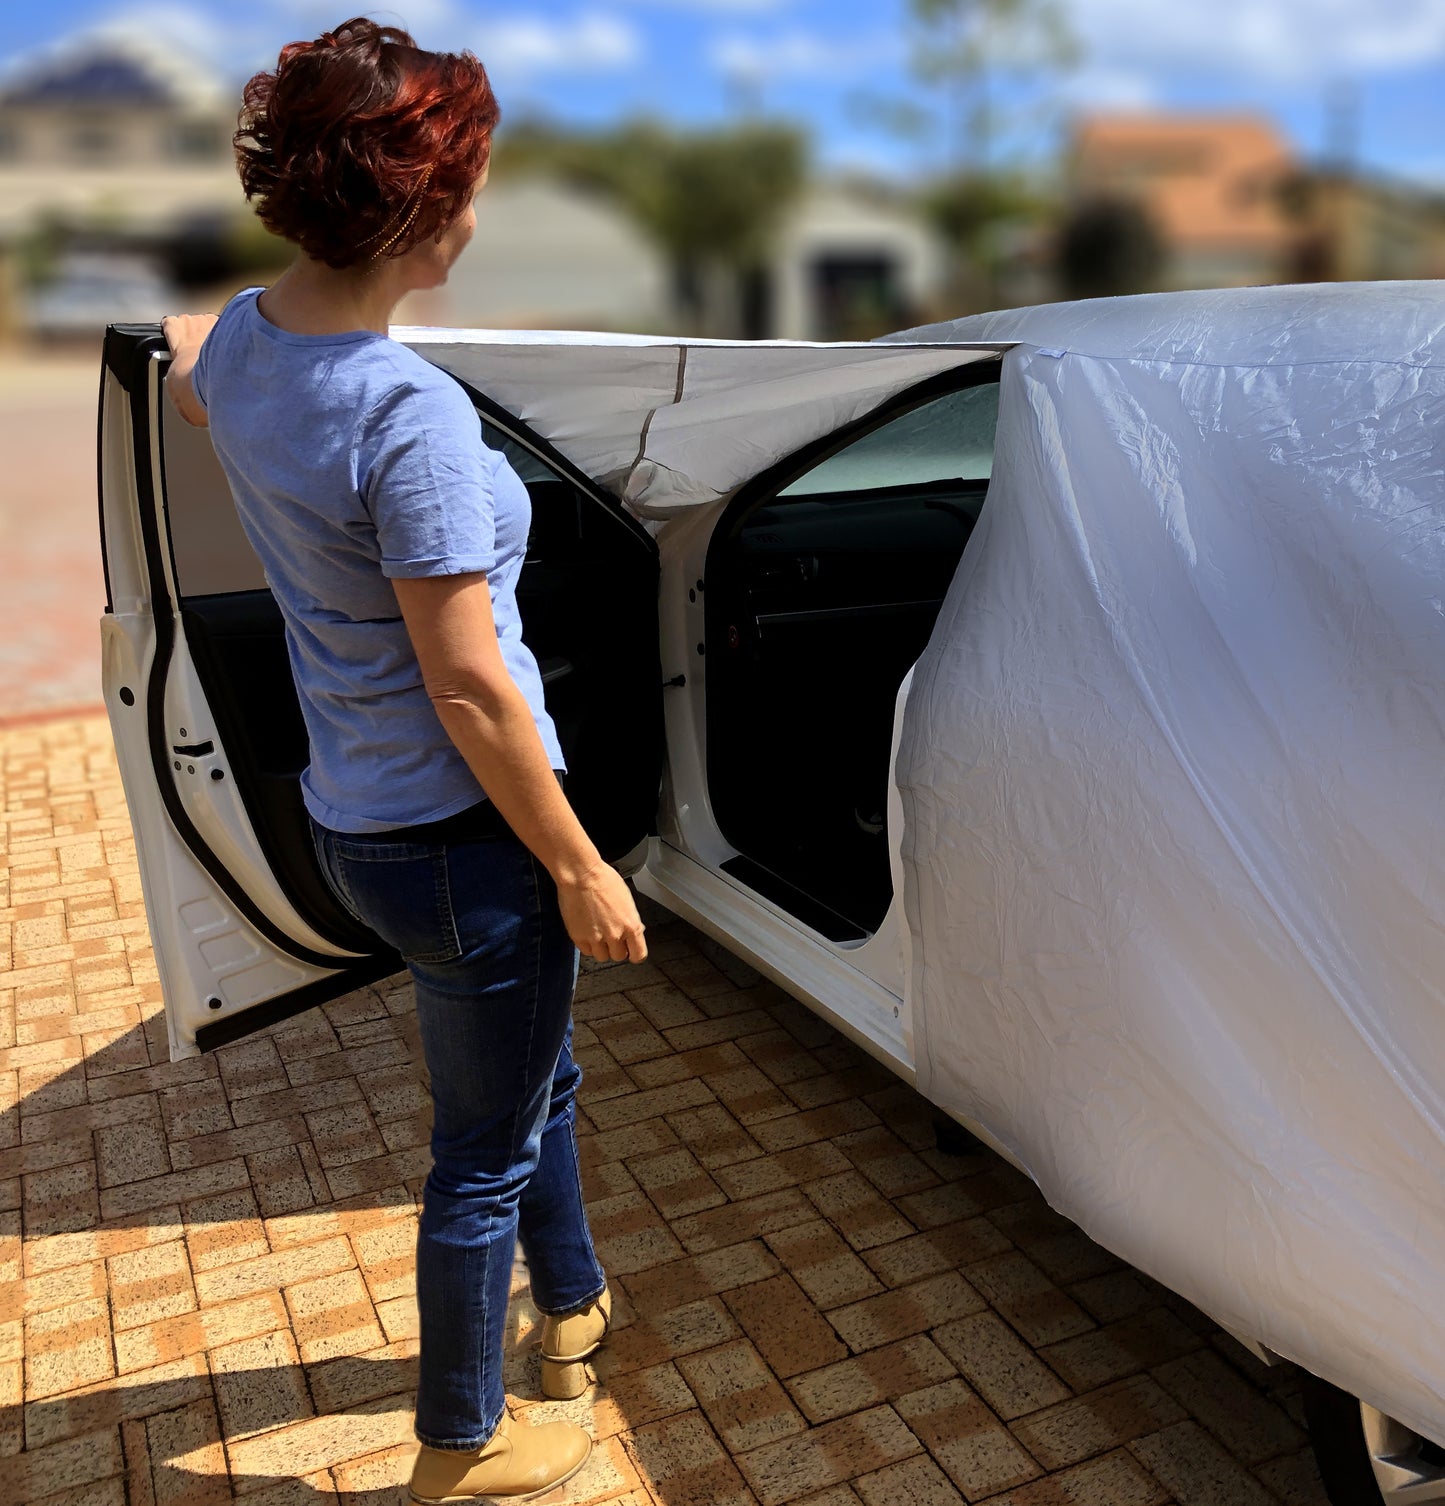 10-Layer Weatherproof Car Cover